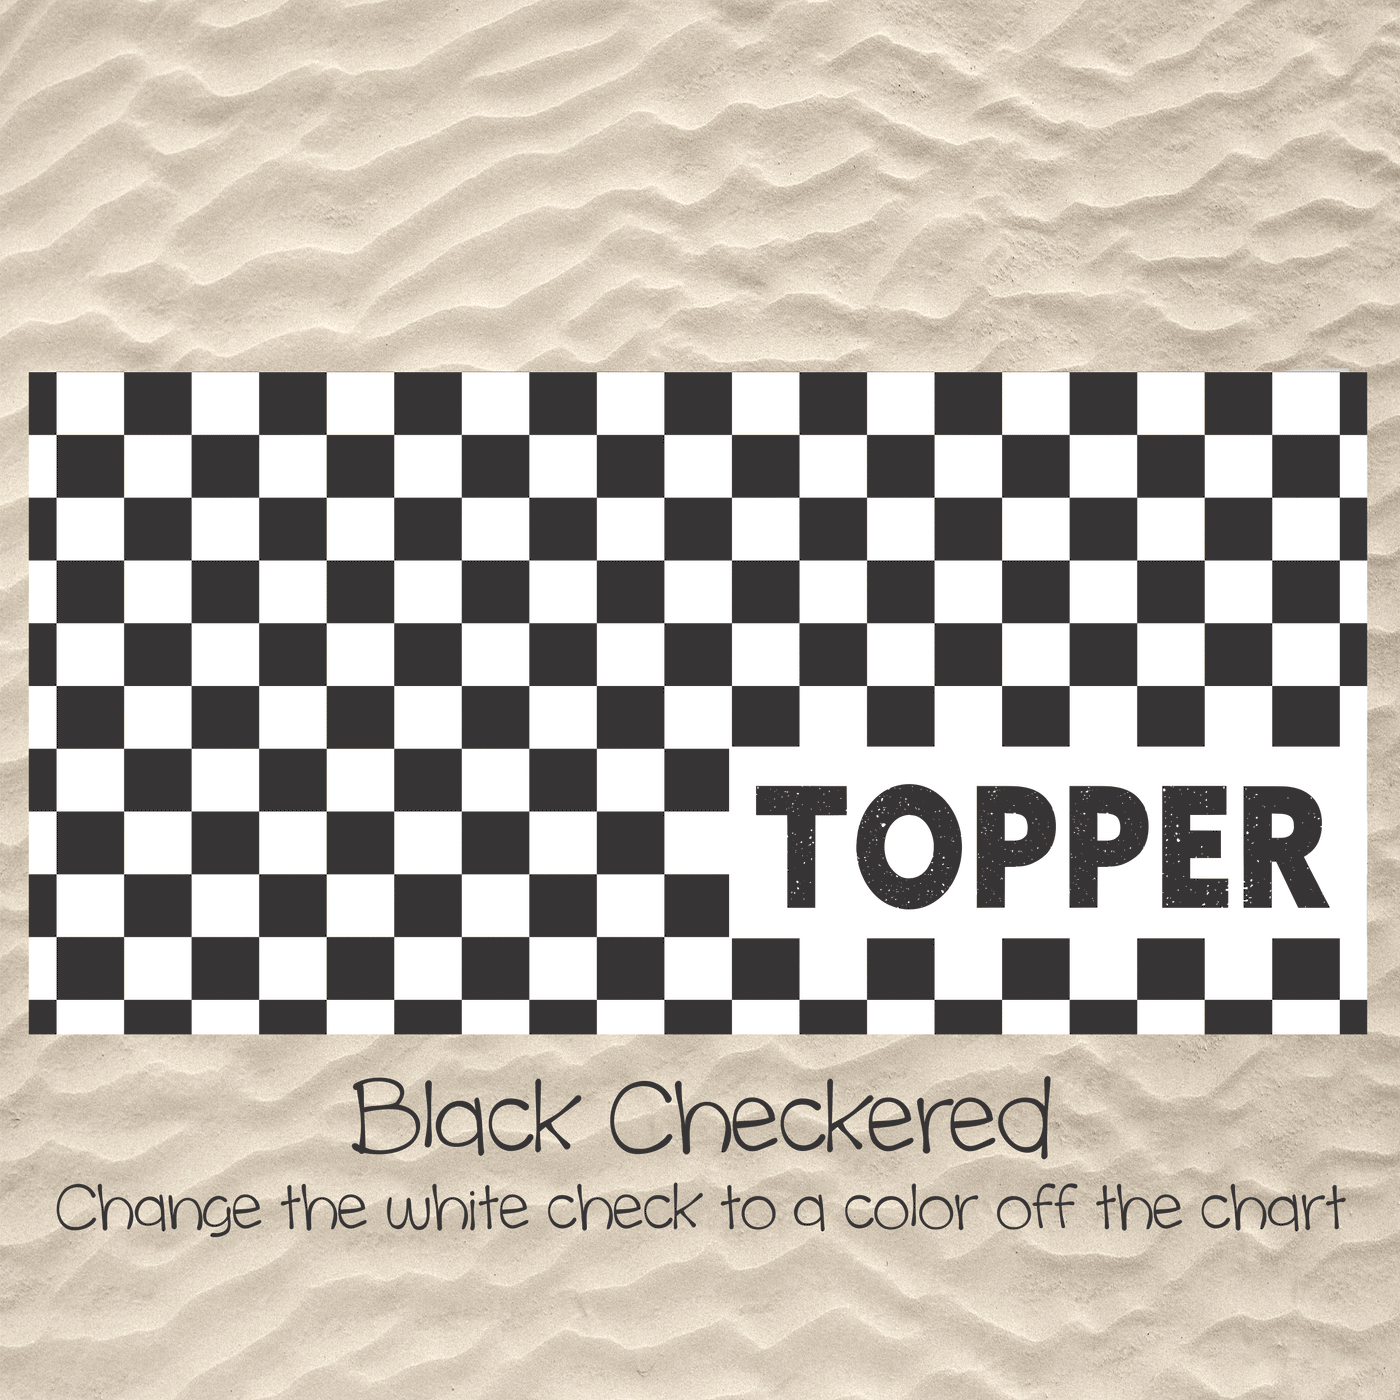 Black Checkered (You pick your accent color!)